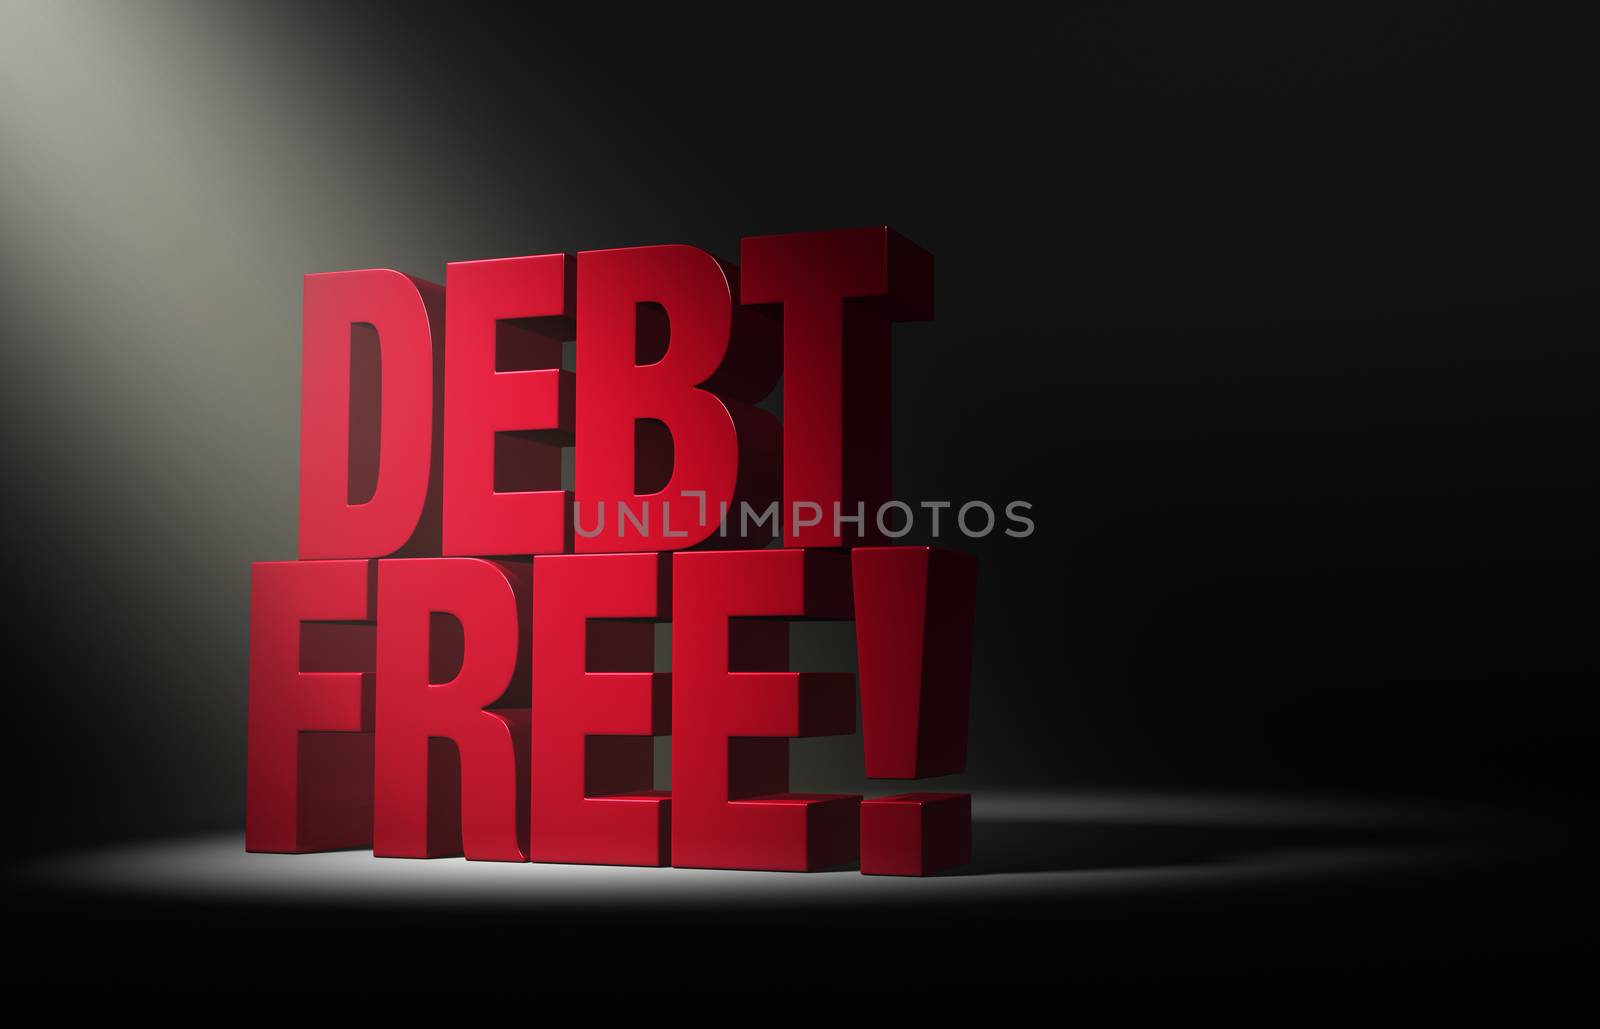 Angled spotlight reveals a bold, red "DEBT FREE!" on a dark background.